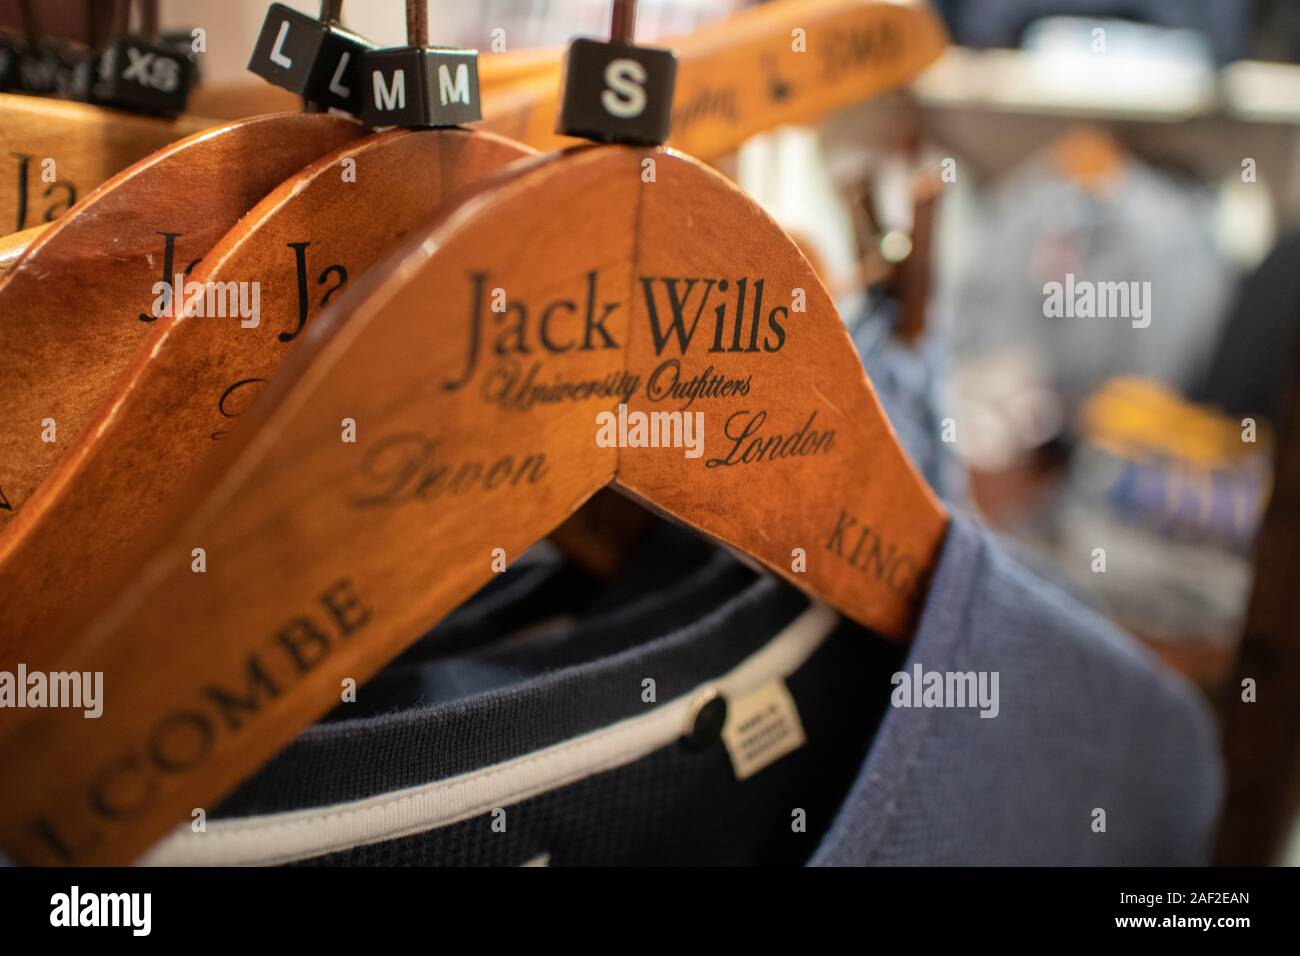 Jack wills clothing rail in a store. Jack Wills is a high quality British high Street store brand heavily marketed towards university students Stock Photo